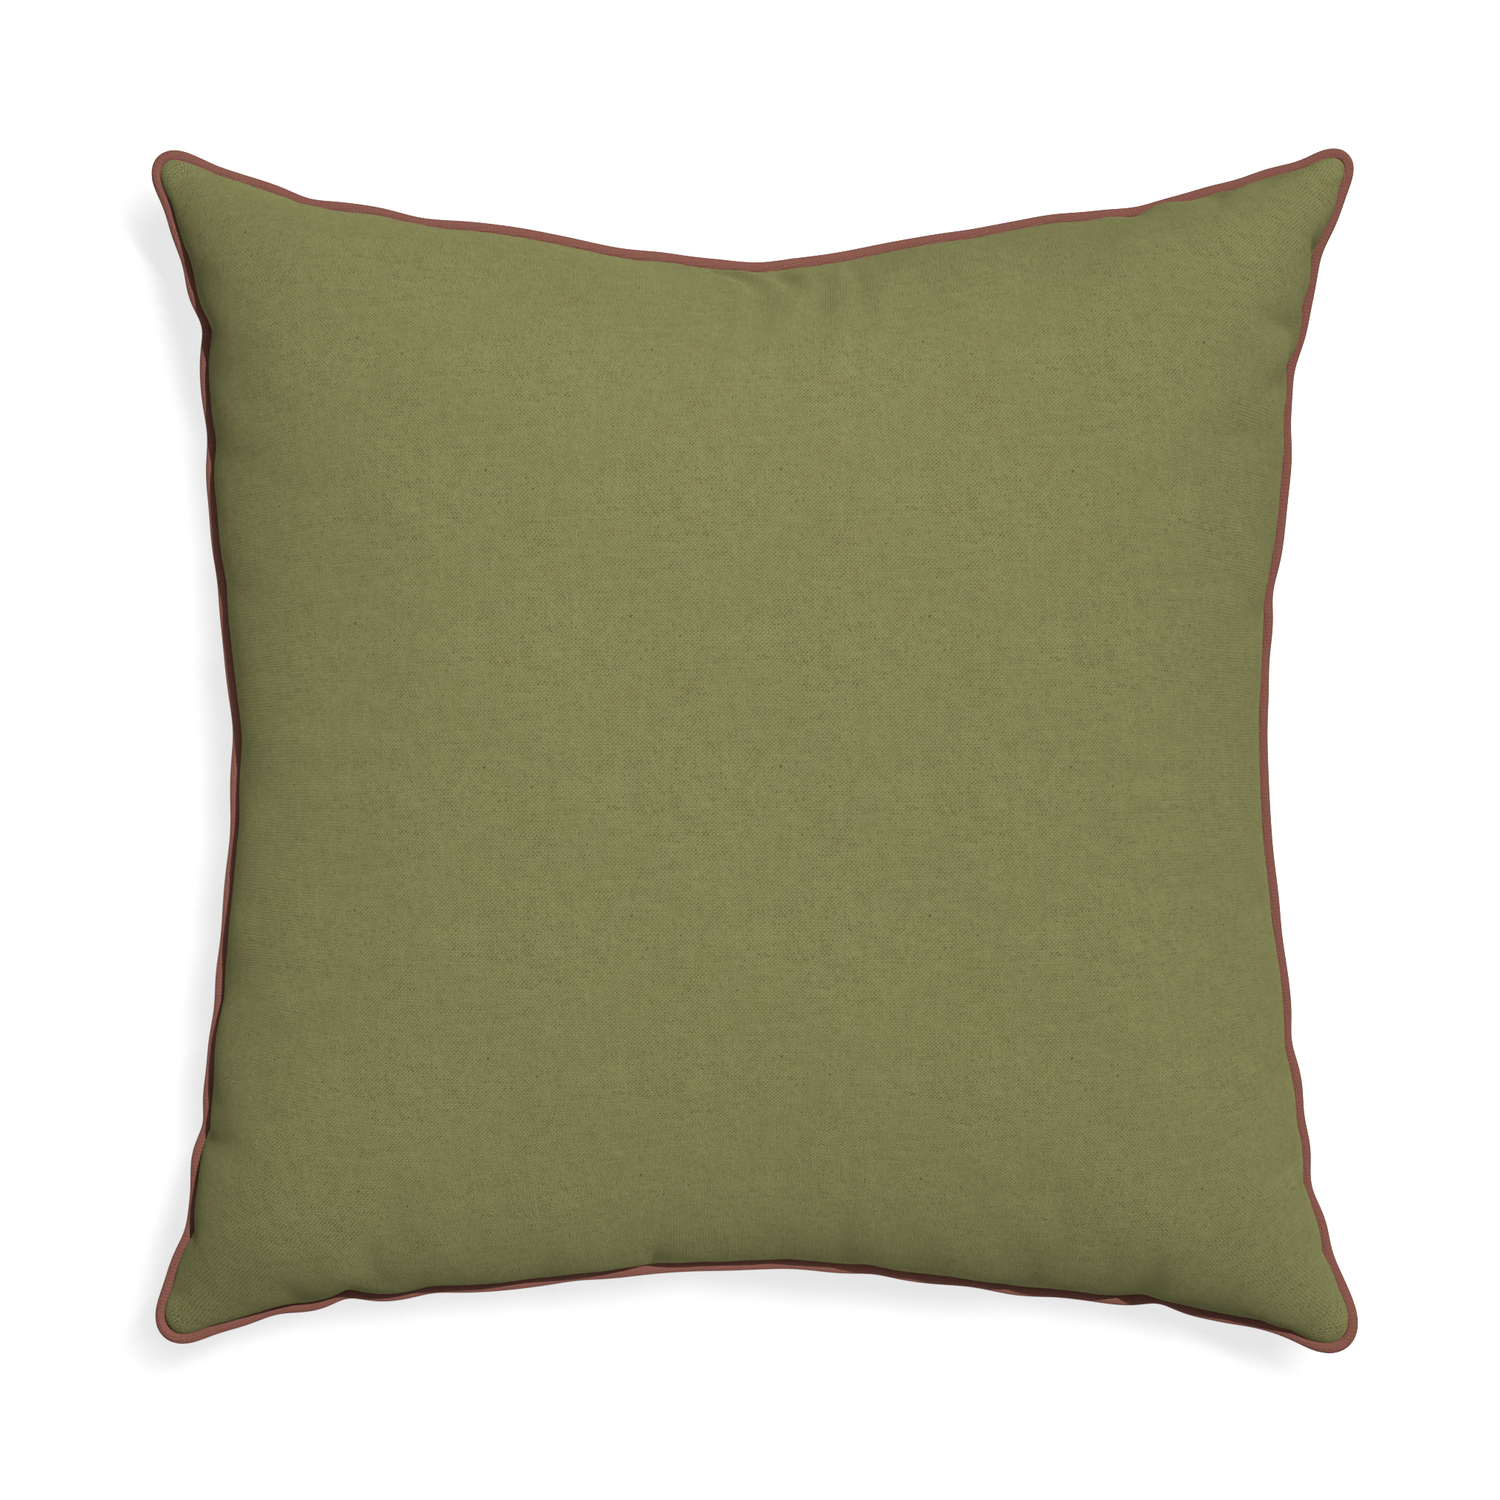 Euro-sham moss custom moss greenpillow with w piping on white background